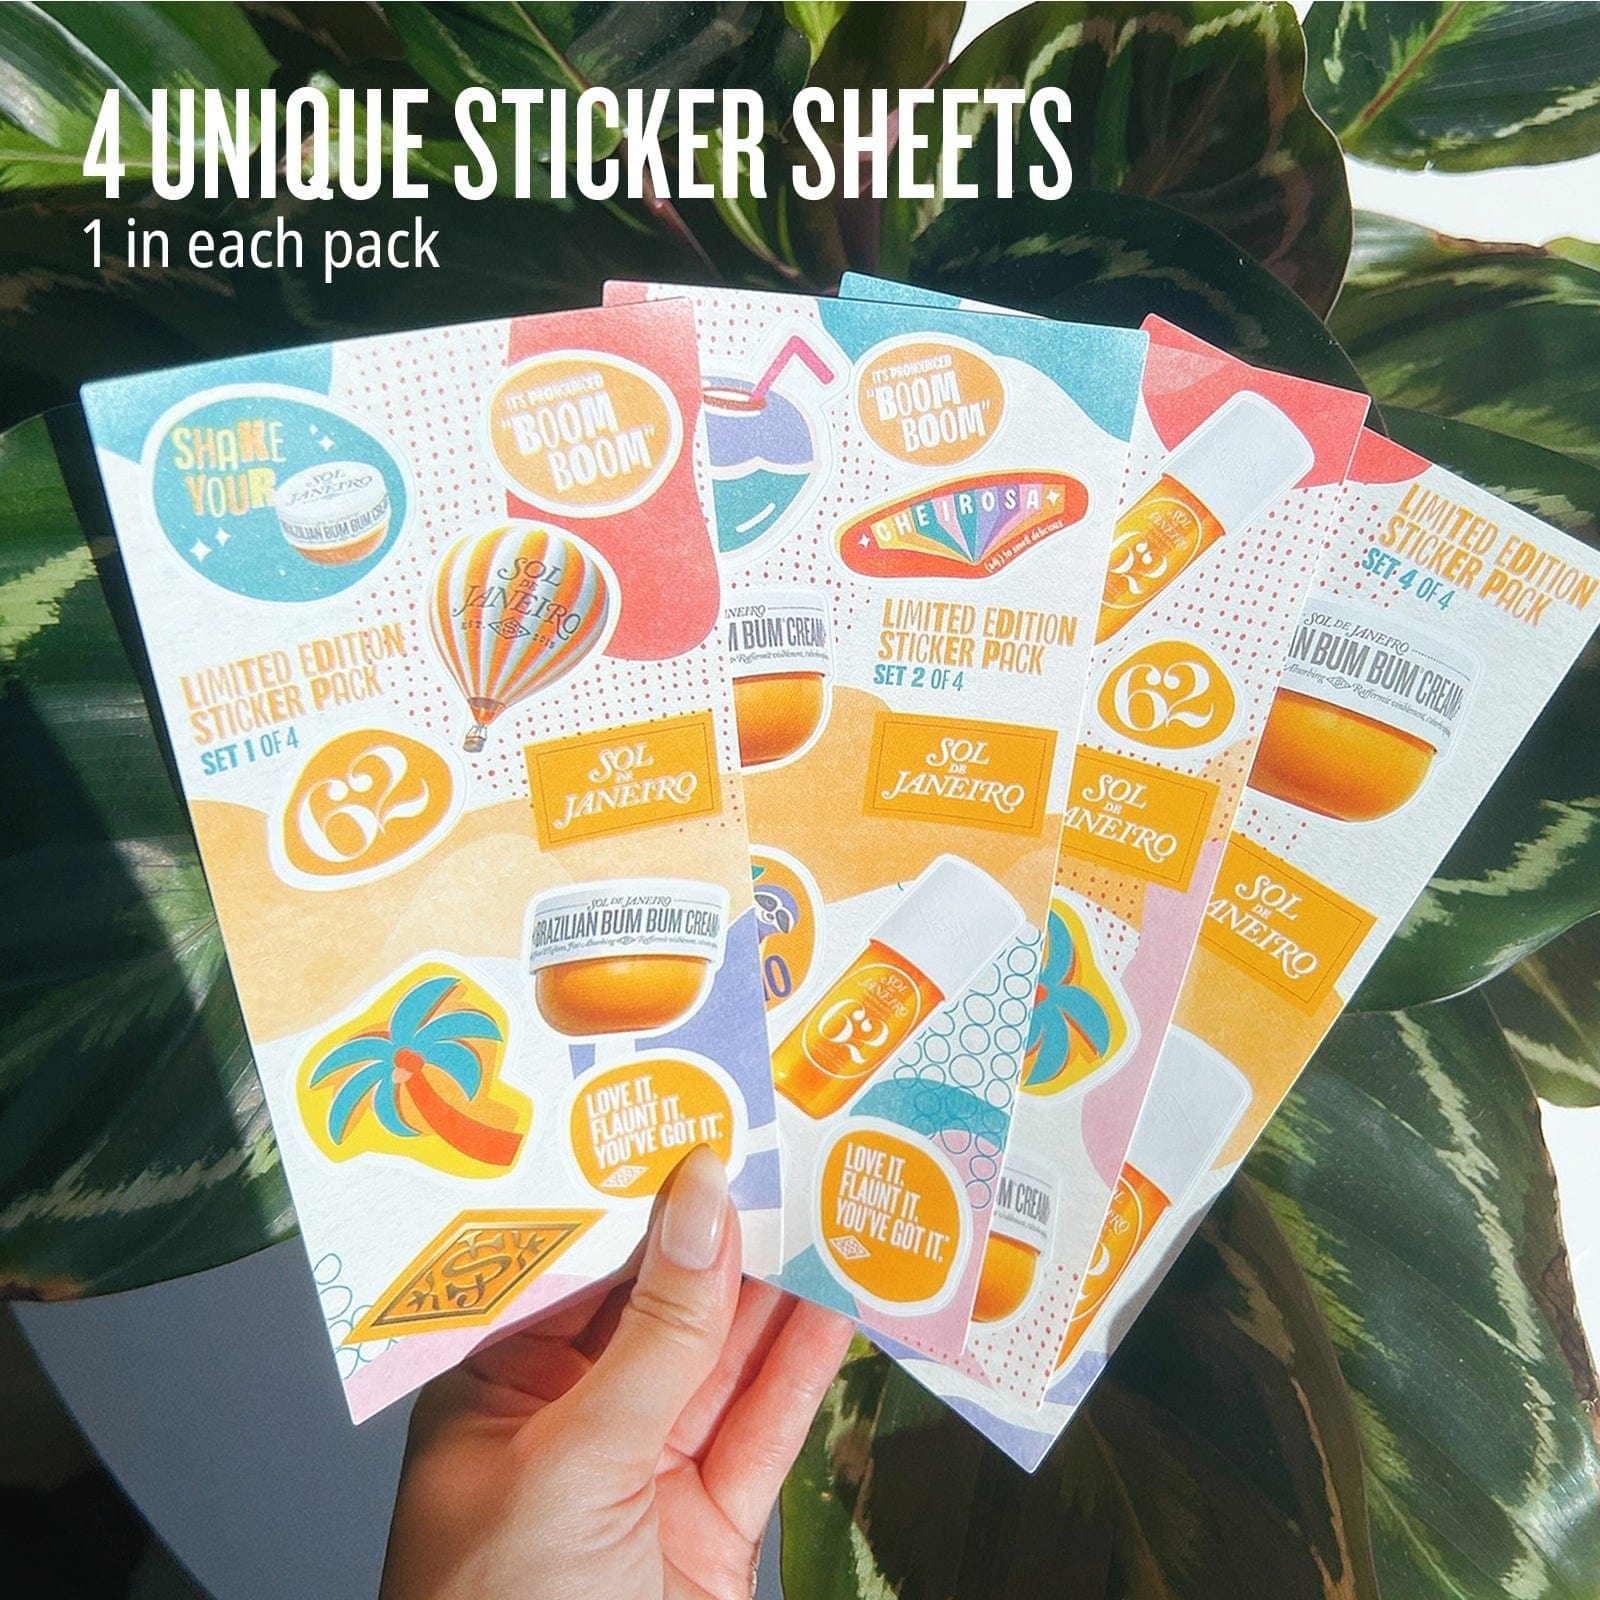 4 unique sticker sheets - 1 in each pack